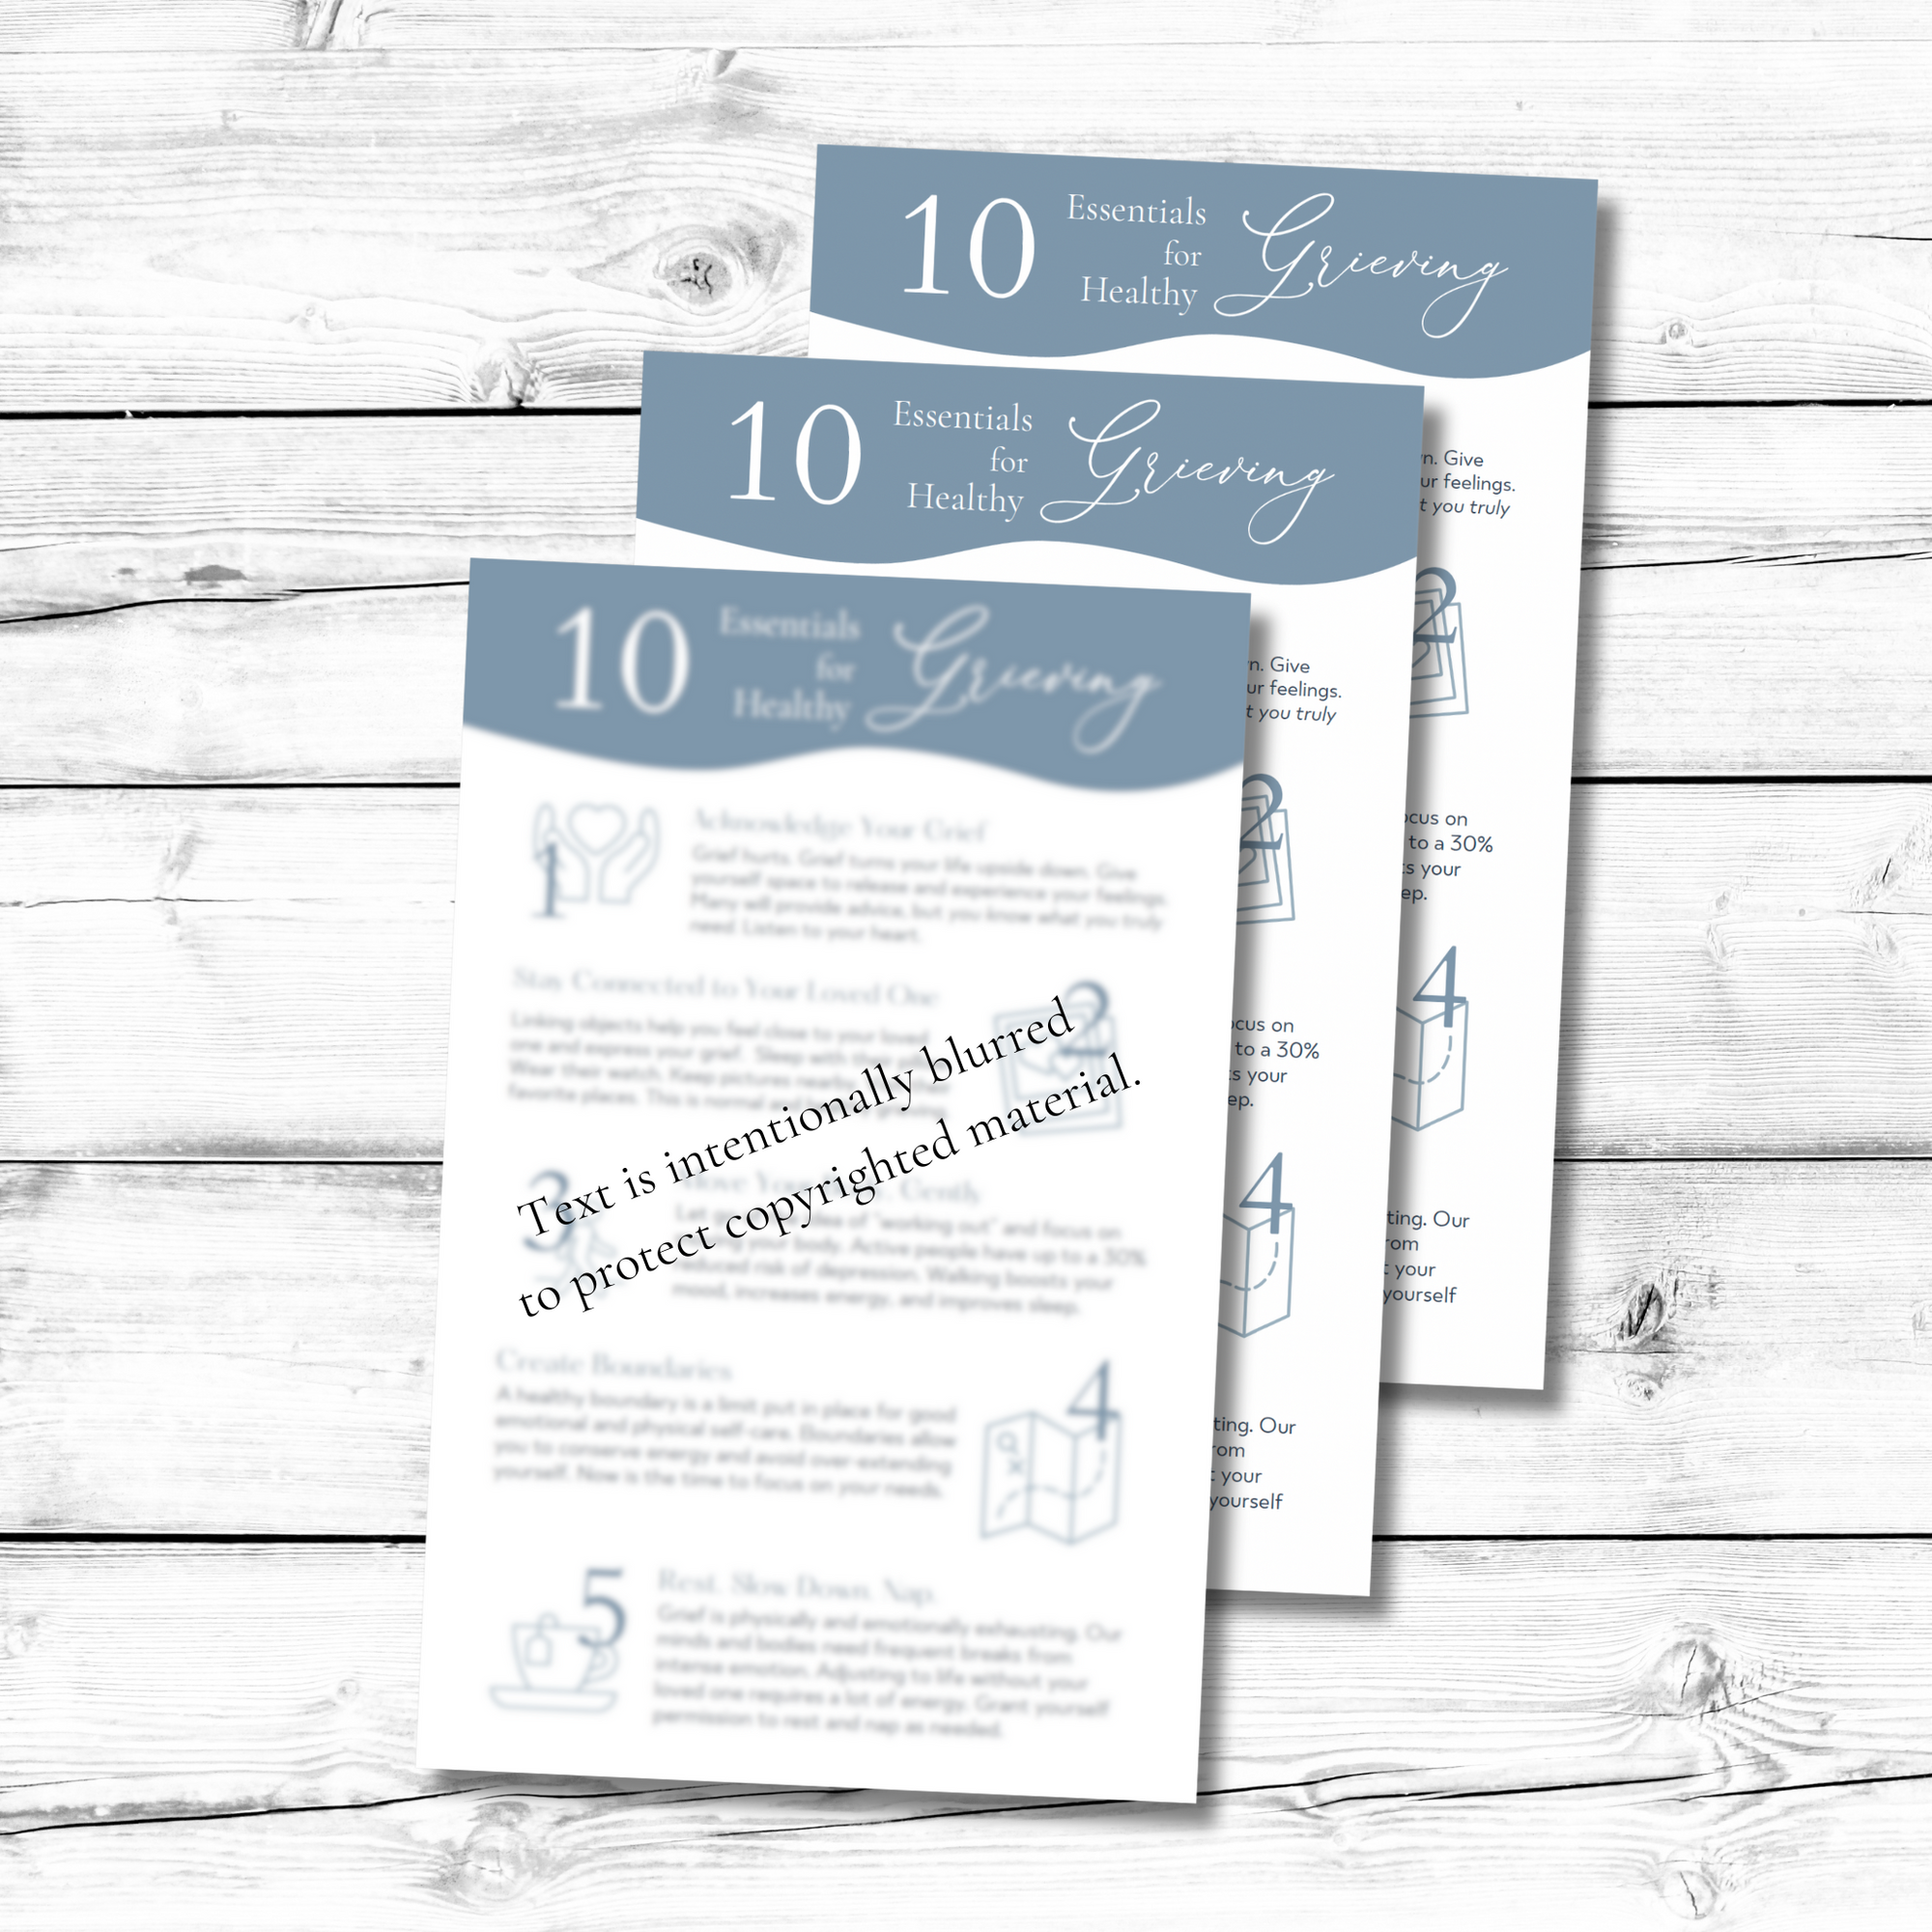 P1008 | The 10 Essentials of Healthy Grieving Pocket Guides